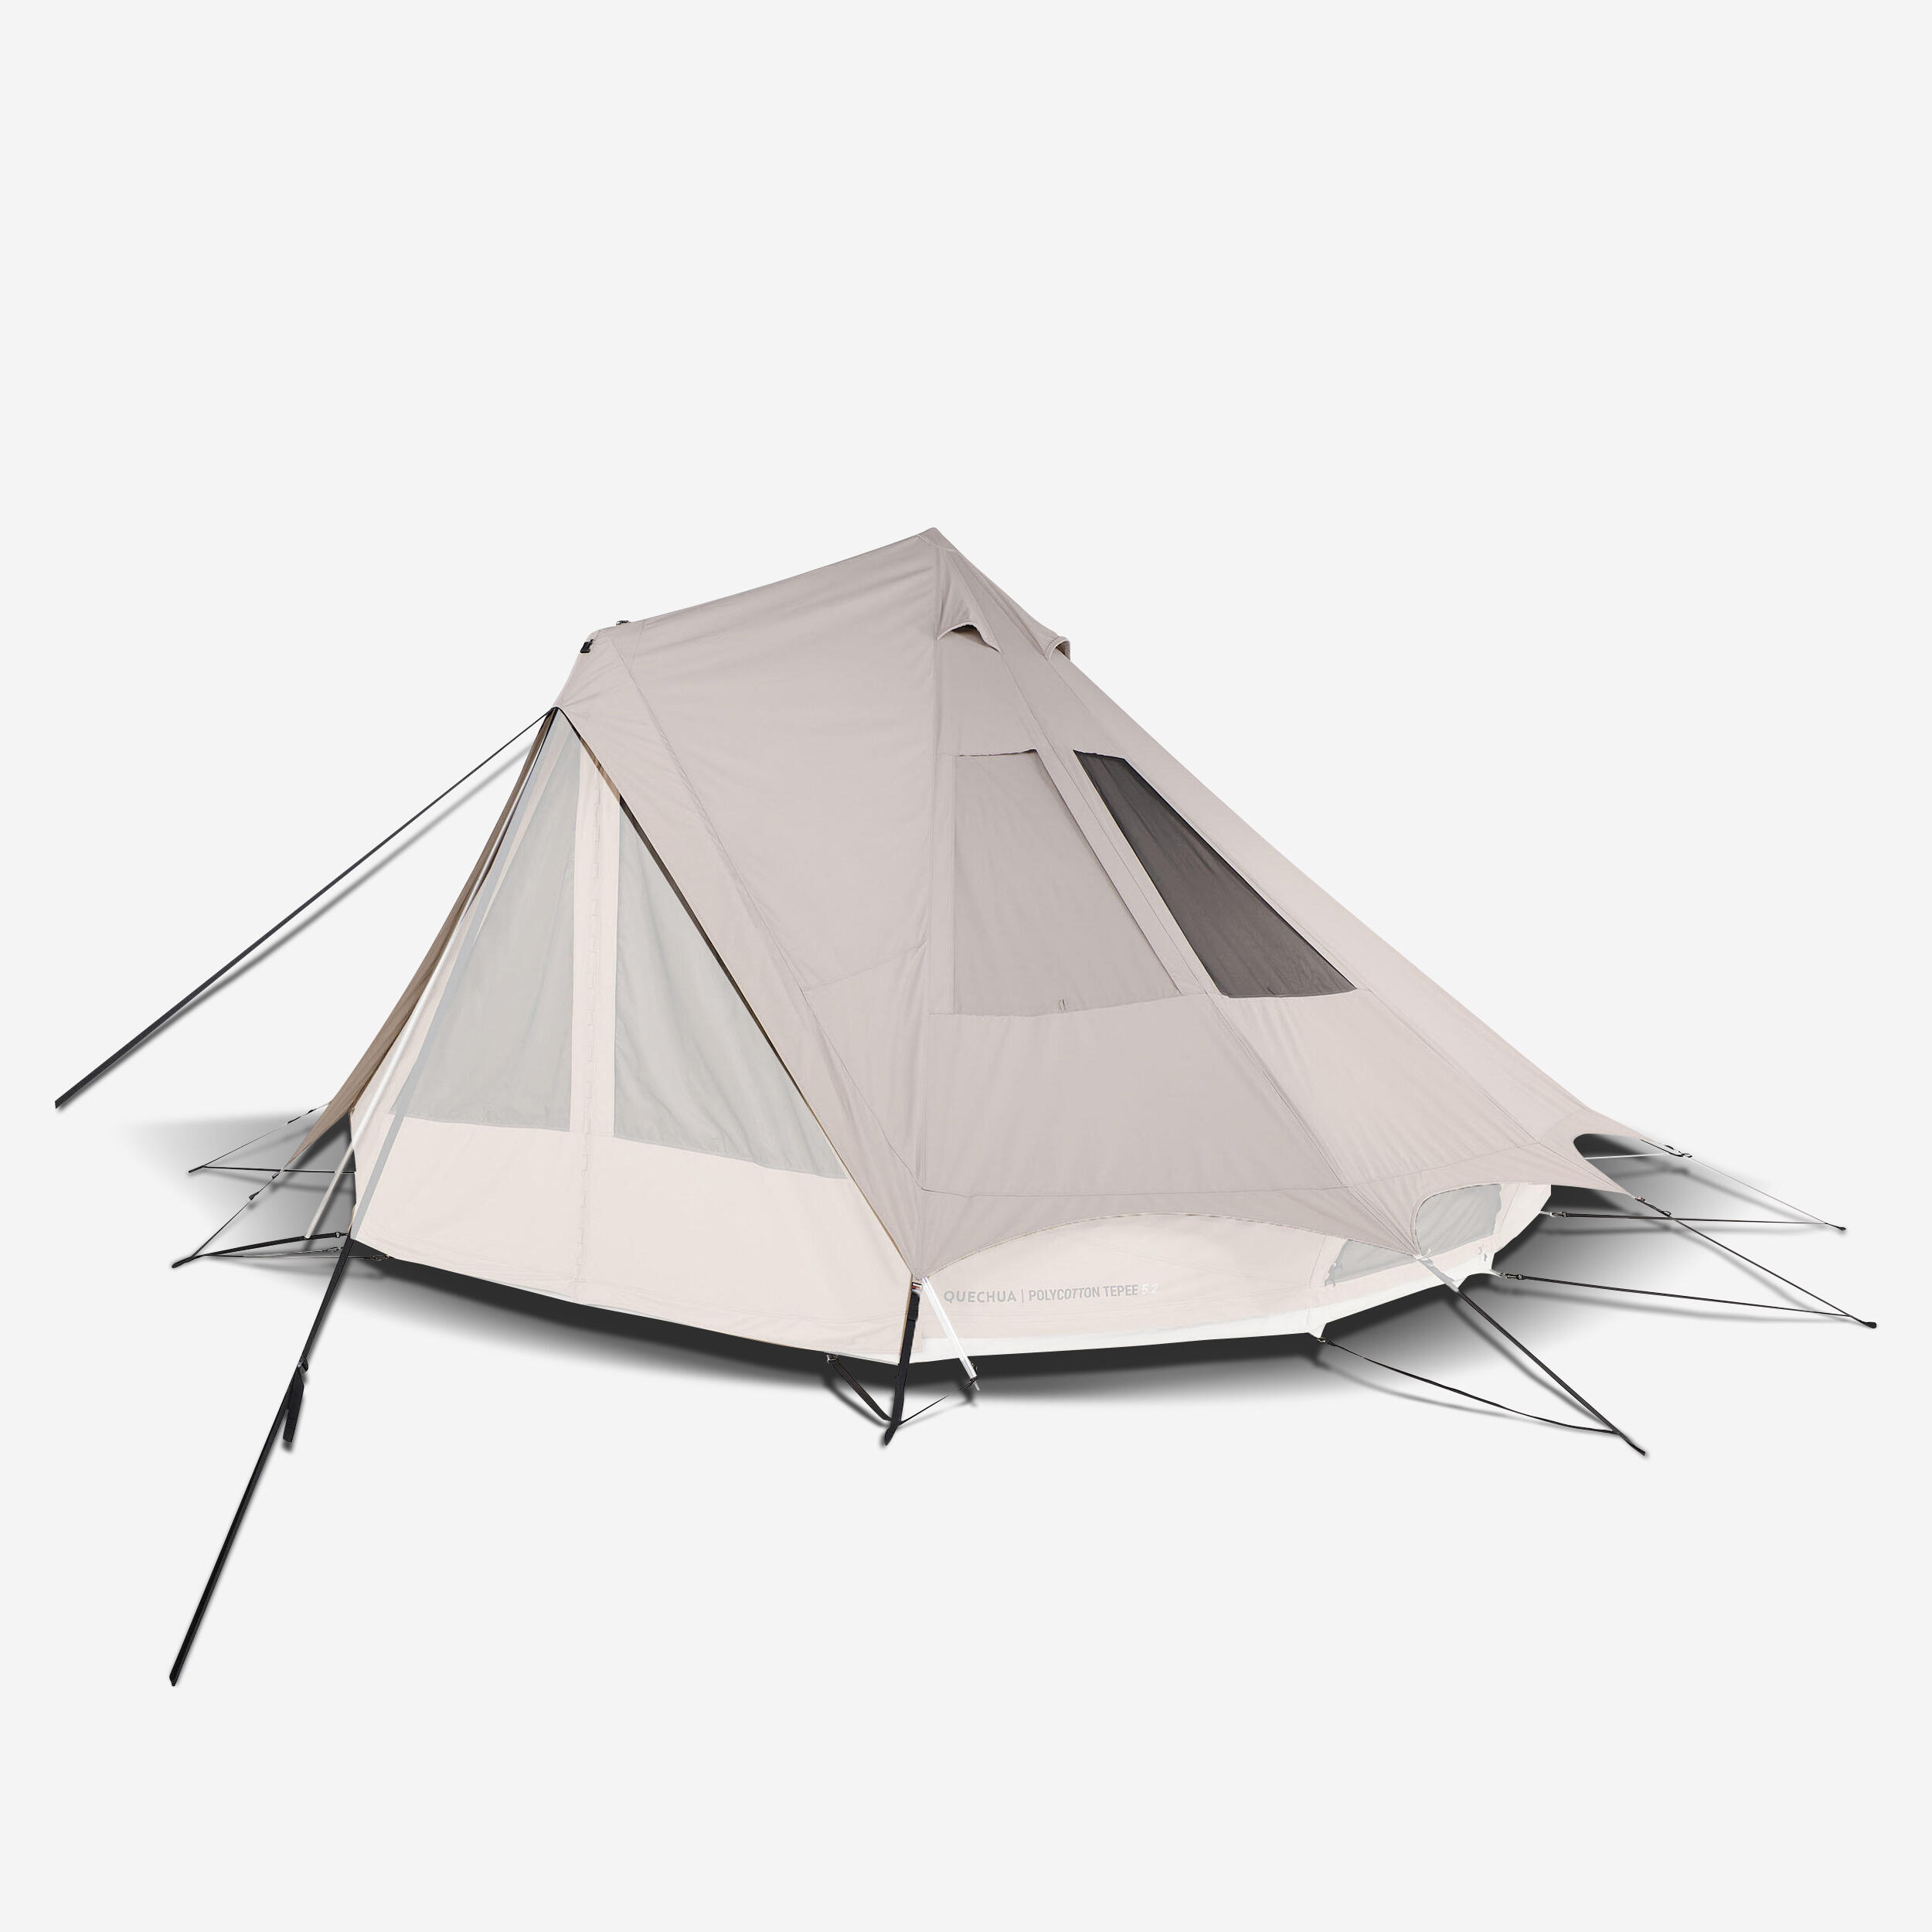 FLYSHEET - SPARE PART FOR THE TIPI POLYCOTTON 5.2 TENT 1/1